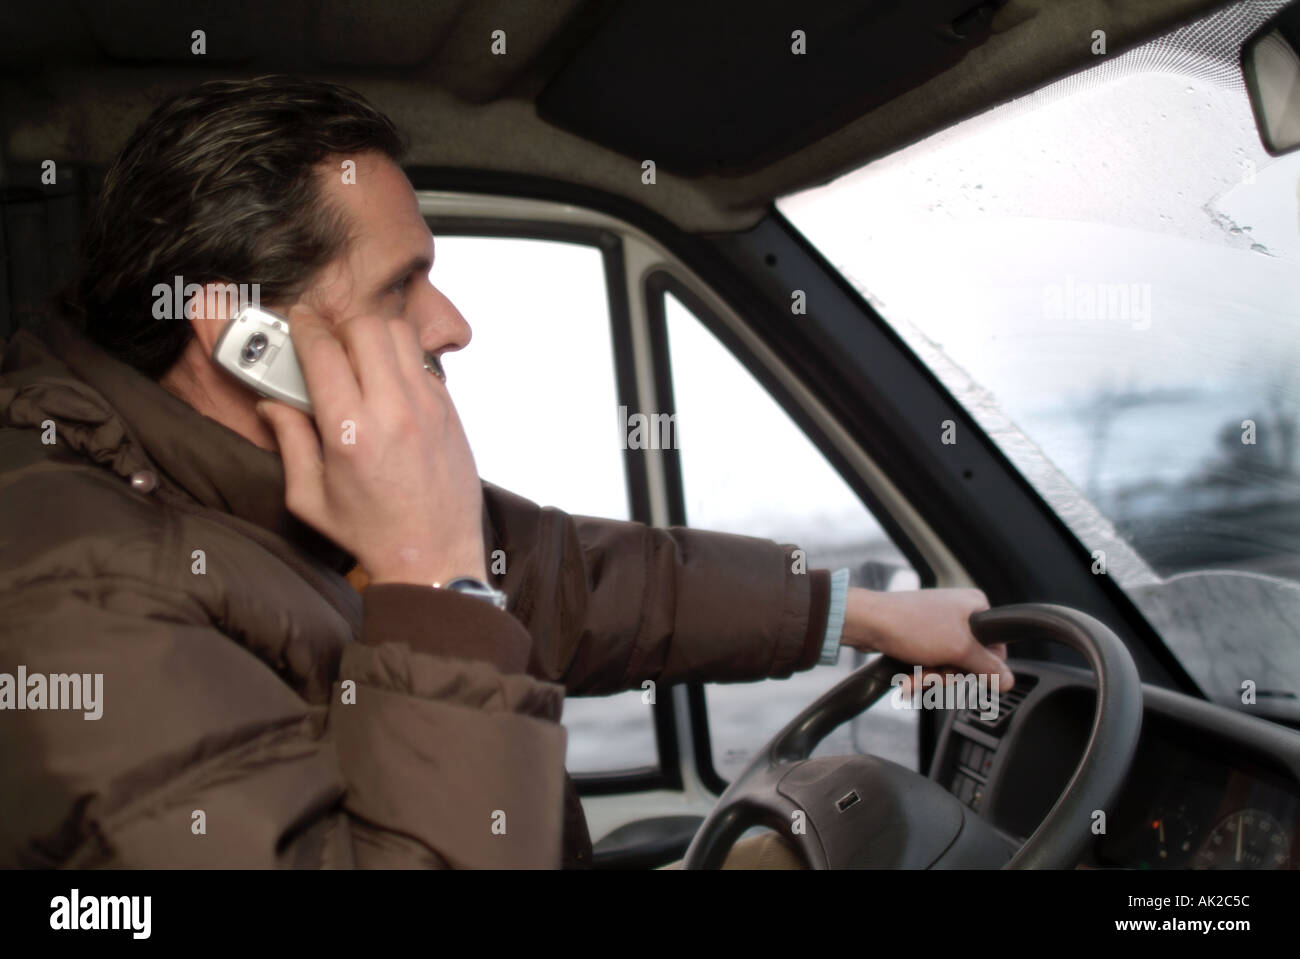 Man talks on mobile phone while driving Stock Photo